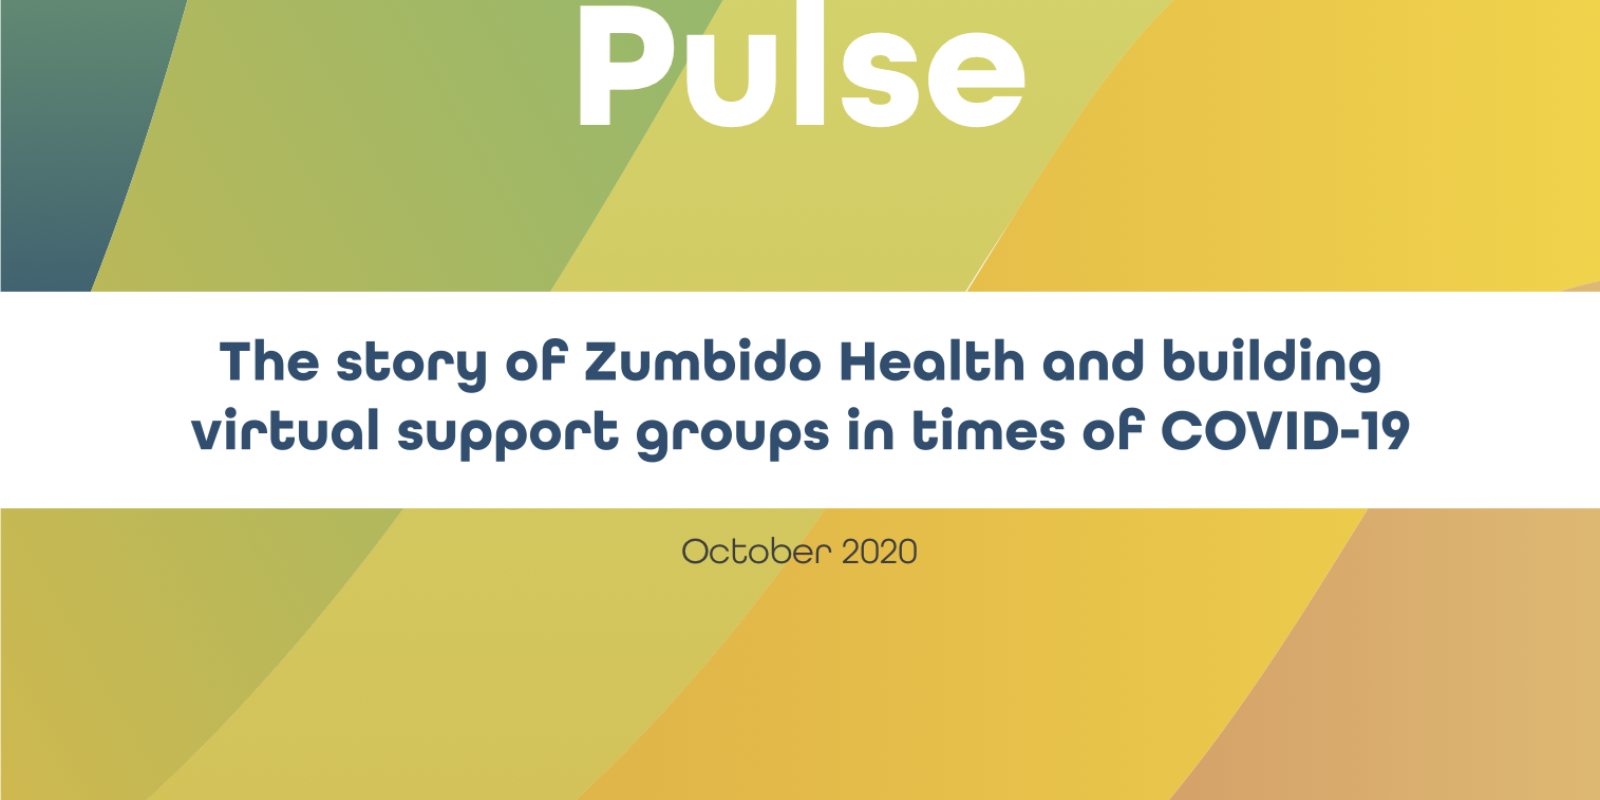 Zumbido Pulse: Building virtual support groups during Covid-19